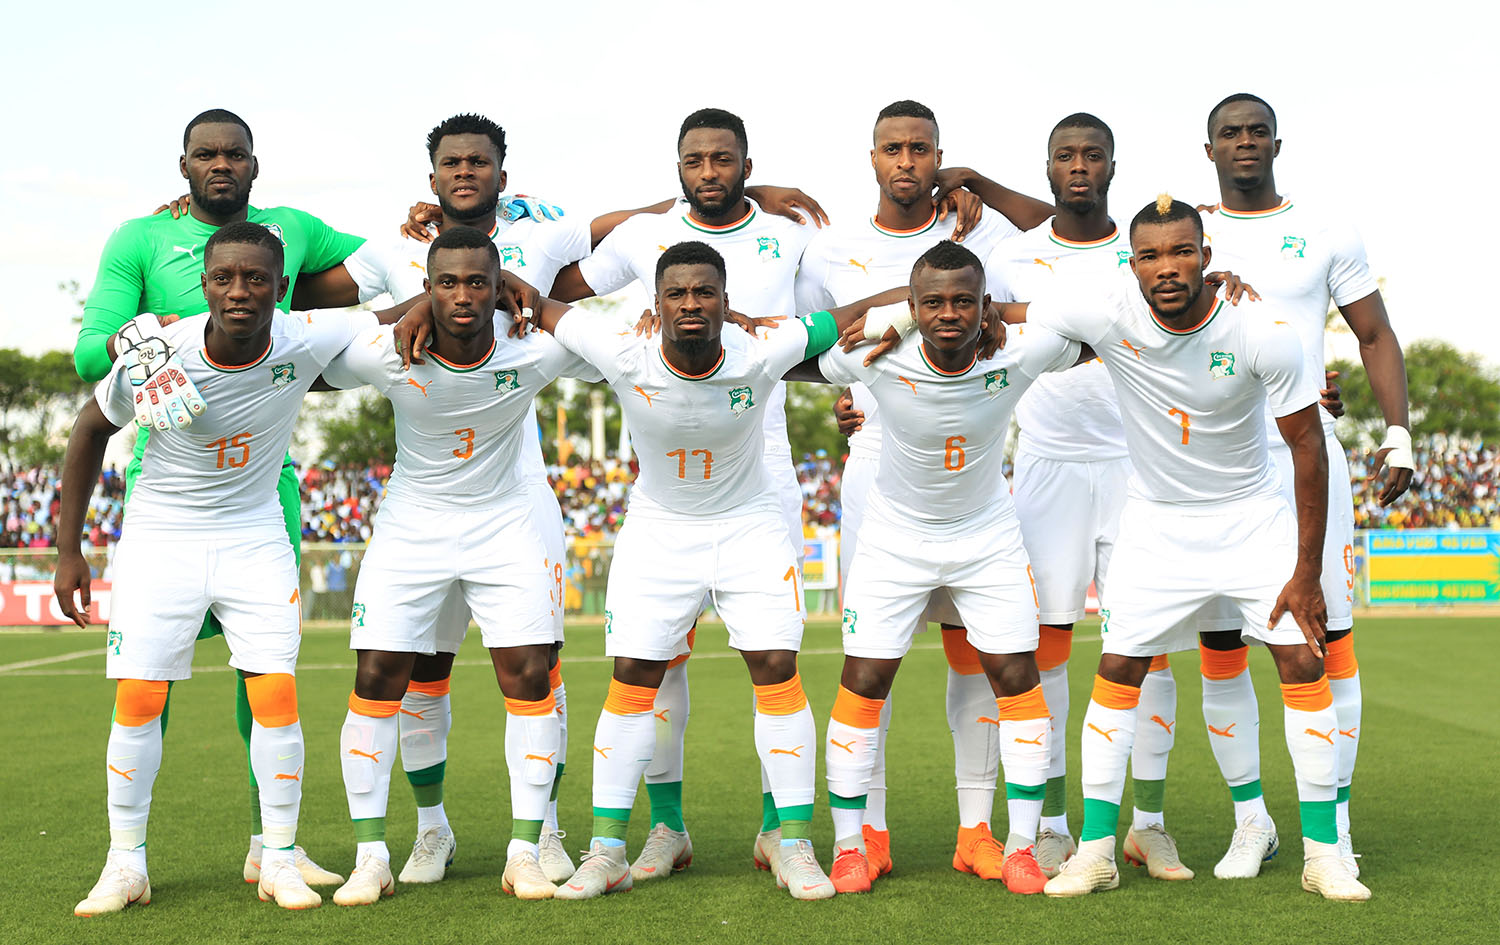 Ivory Coast players line-up before starting the game